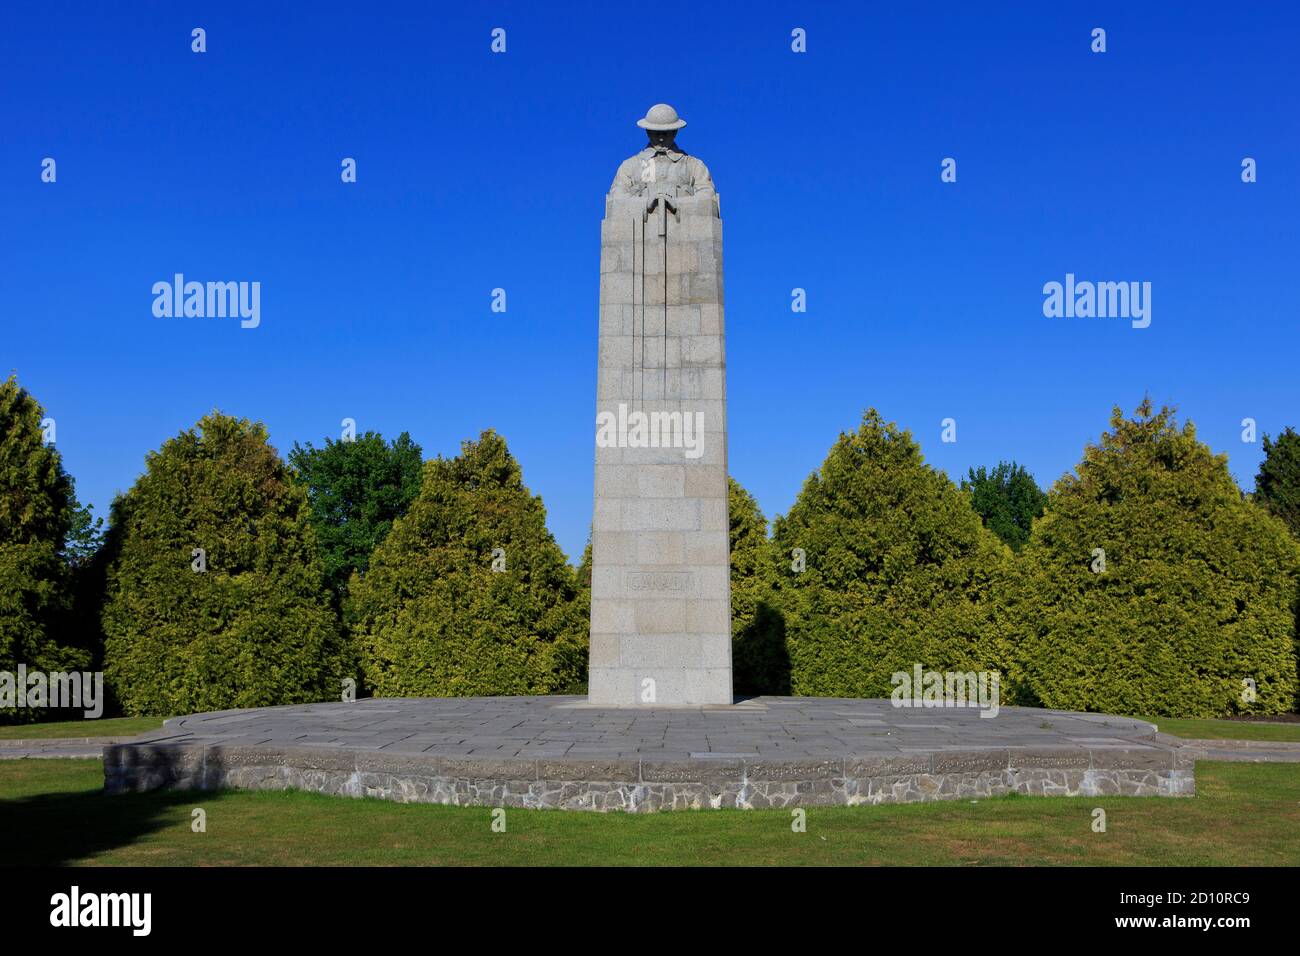 The Brooding Soldier memorial at the Saint Julien Memorial marking the 1st German gas attacks from 22-24 April 1915 in Langemark-Poelkapelle, Belgium Stock Photo